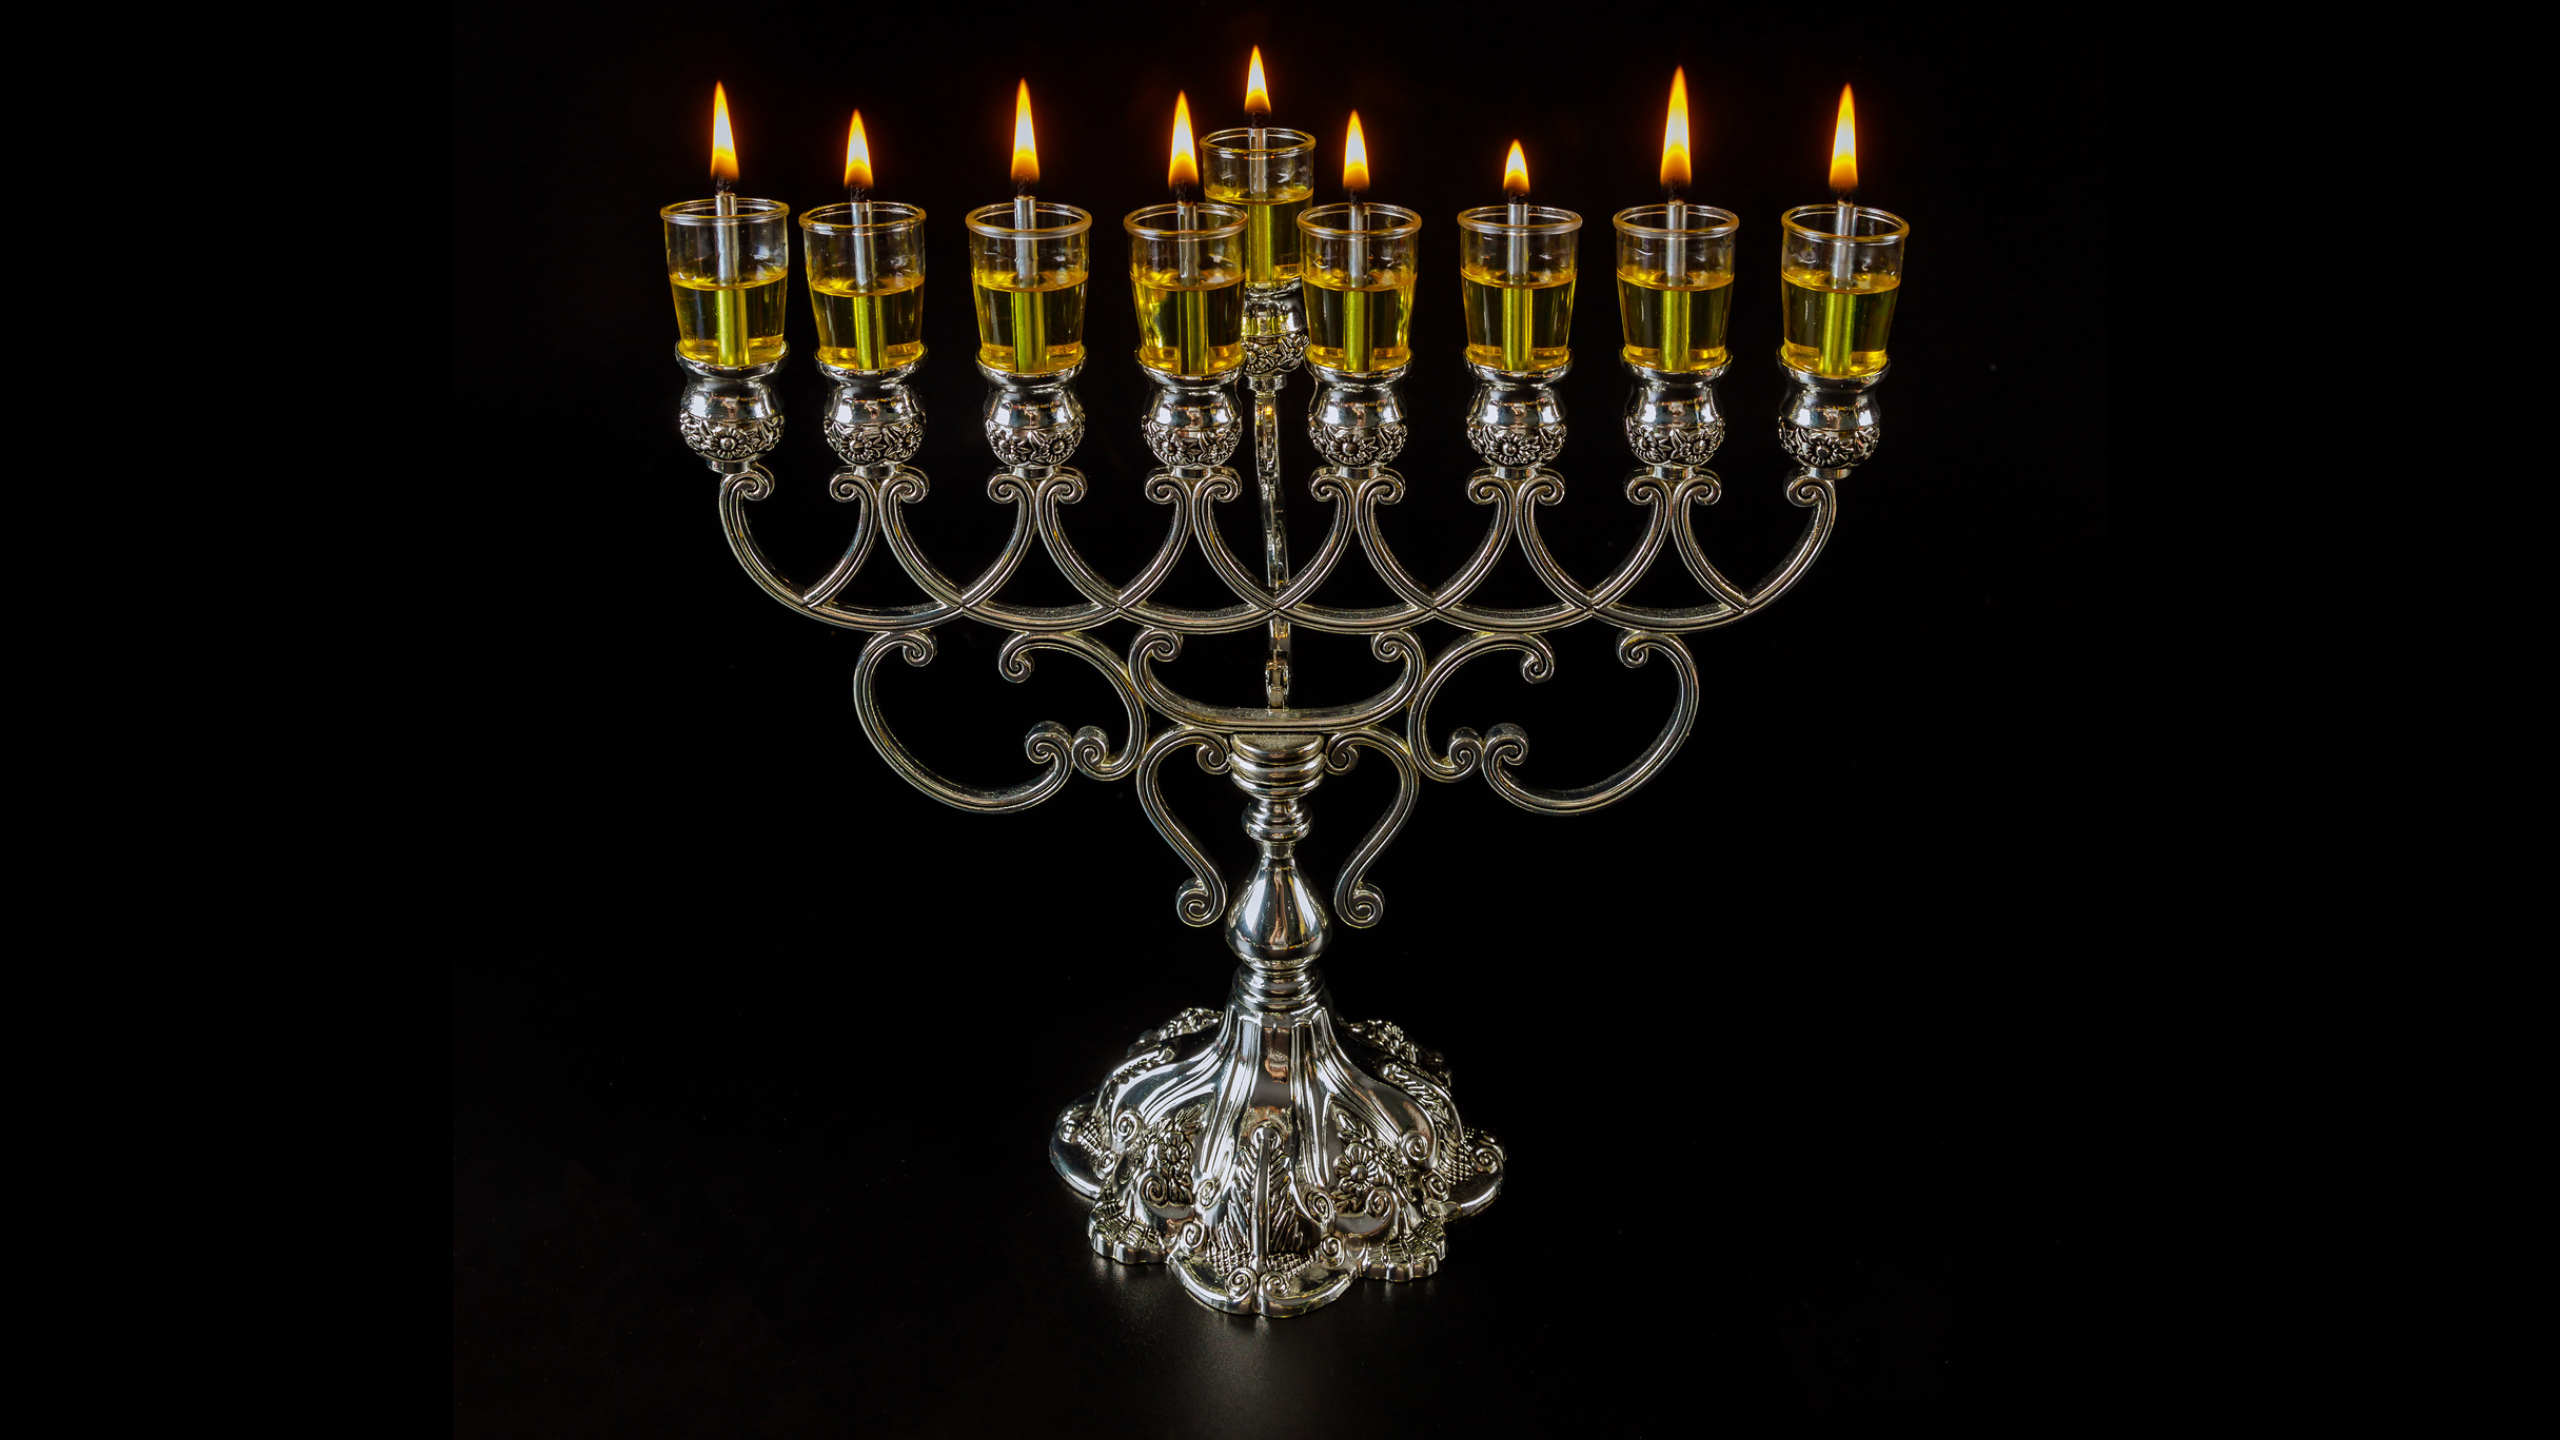 A lit menorah from a Chanukkah to remember.